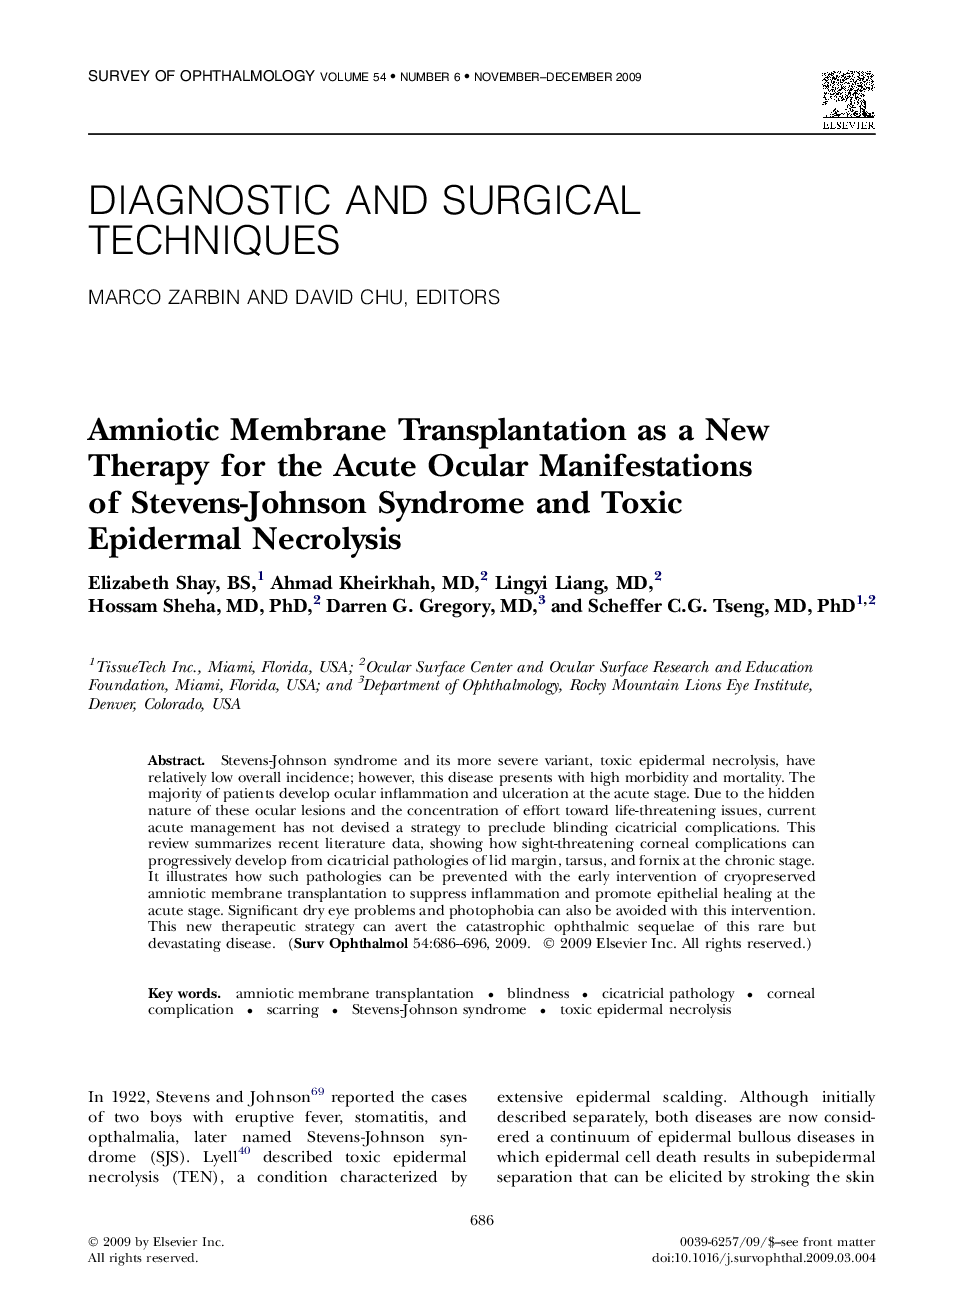 Amniotic Membrane Transplantation as a New Therapy for the Acute Ocular Manifestations of Stevens-Johnson Syndrome and Toxic Epidermal Necrolysis 